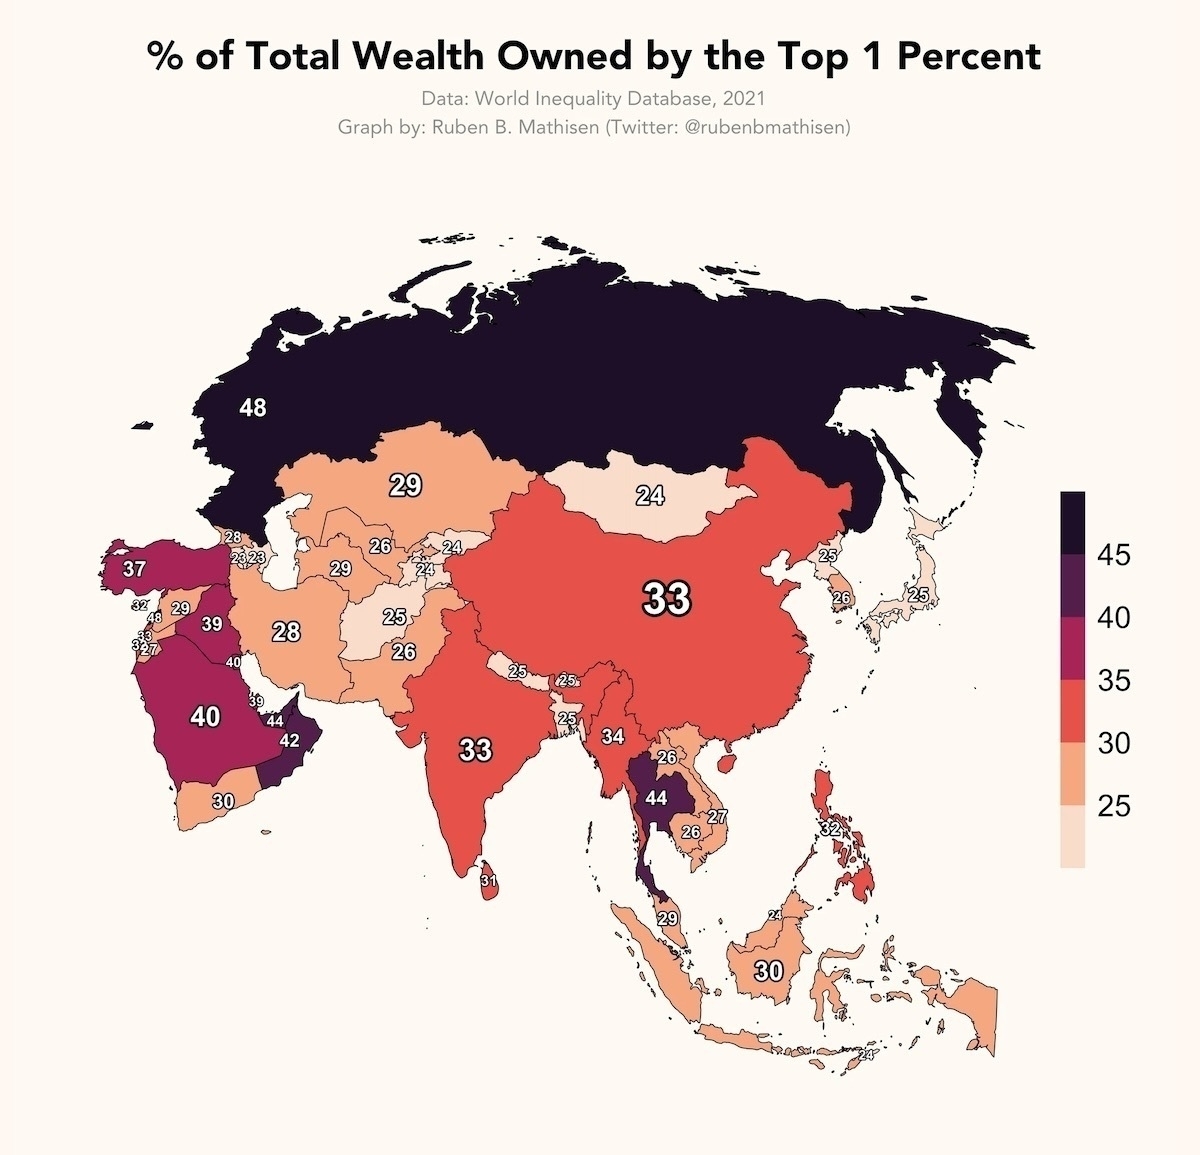 Map of Asia and the Middle East showing the % of Total Wealth Owned by the Top 1 Percent for each country. Some highlights include: China and India = 33%, Saudi Arabia = 40%, Iran = 28%, North Korea = 25%, South Korea = 26%, Japan = 25%, Thailand 44%. Russia at the highest = 48% and lowest is Azerbaijan and Armenia = 23%